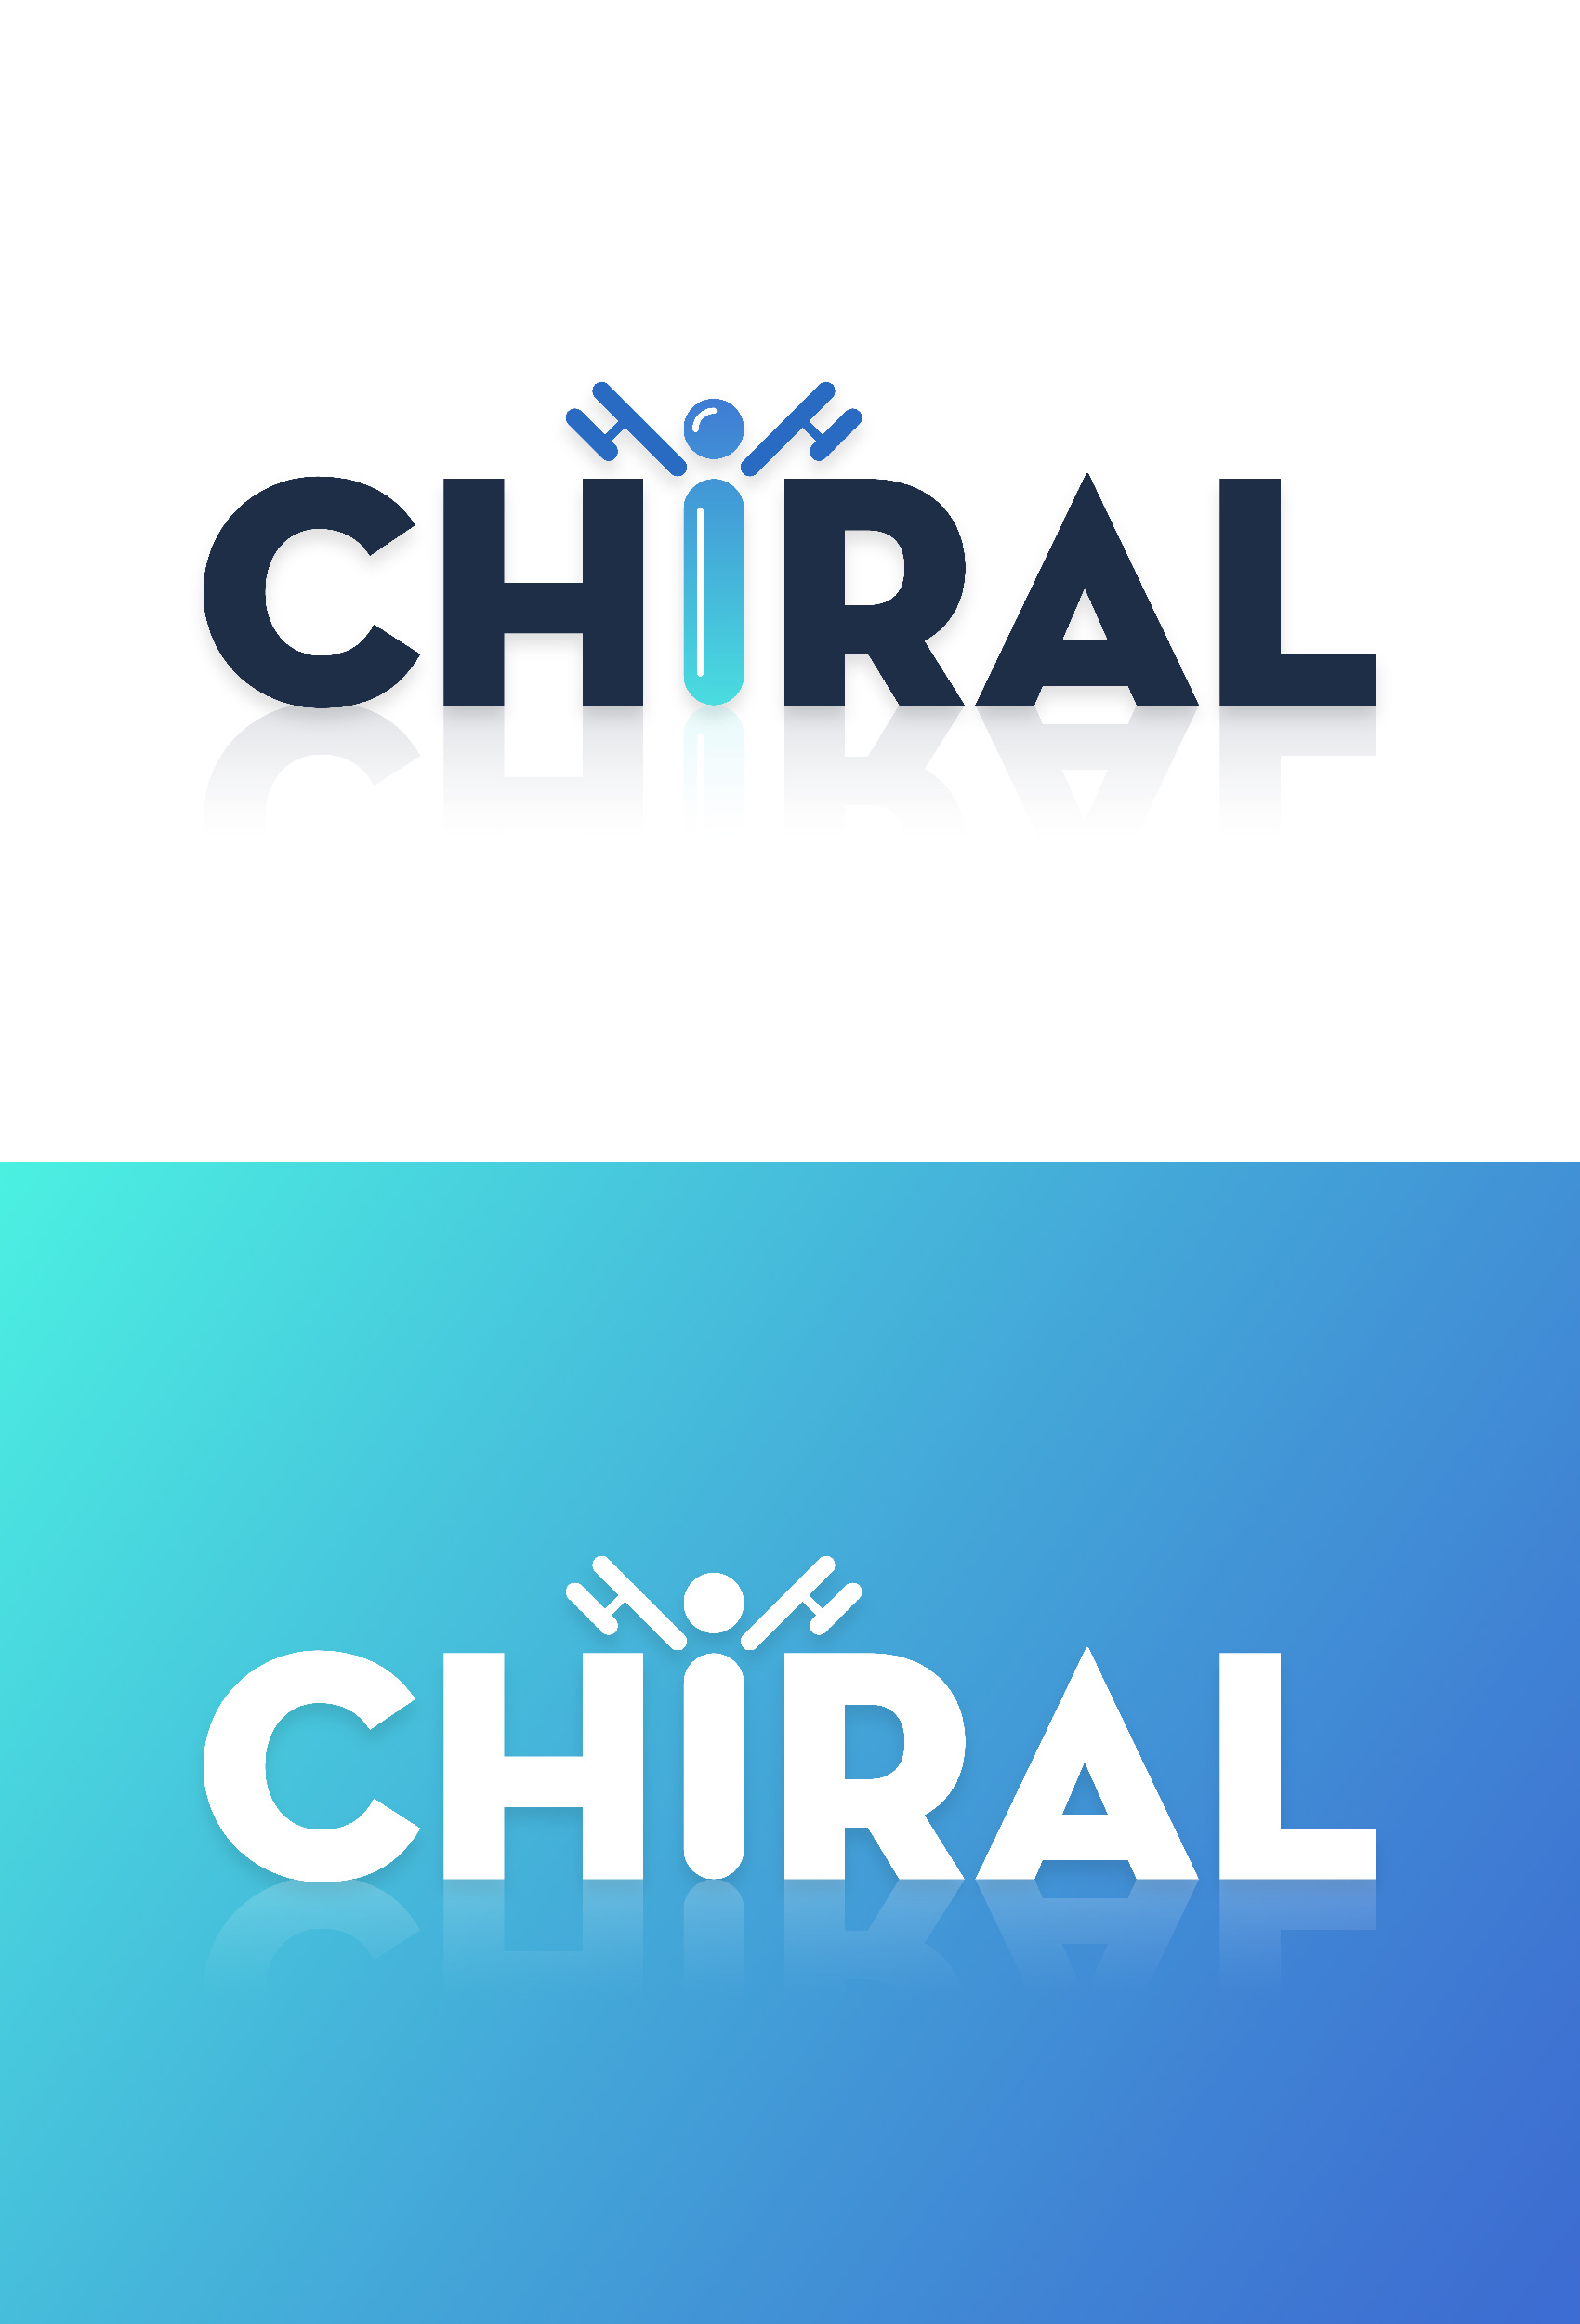 An image of Chiral's branding